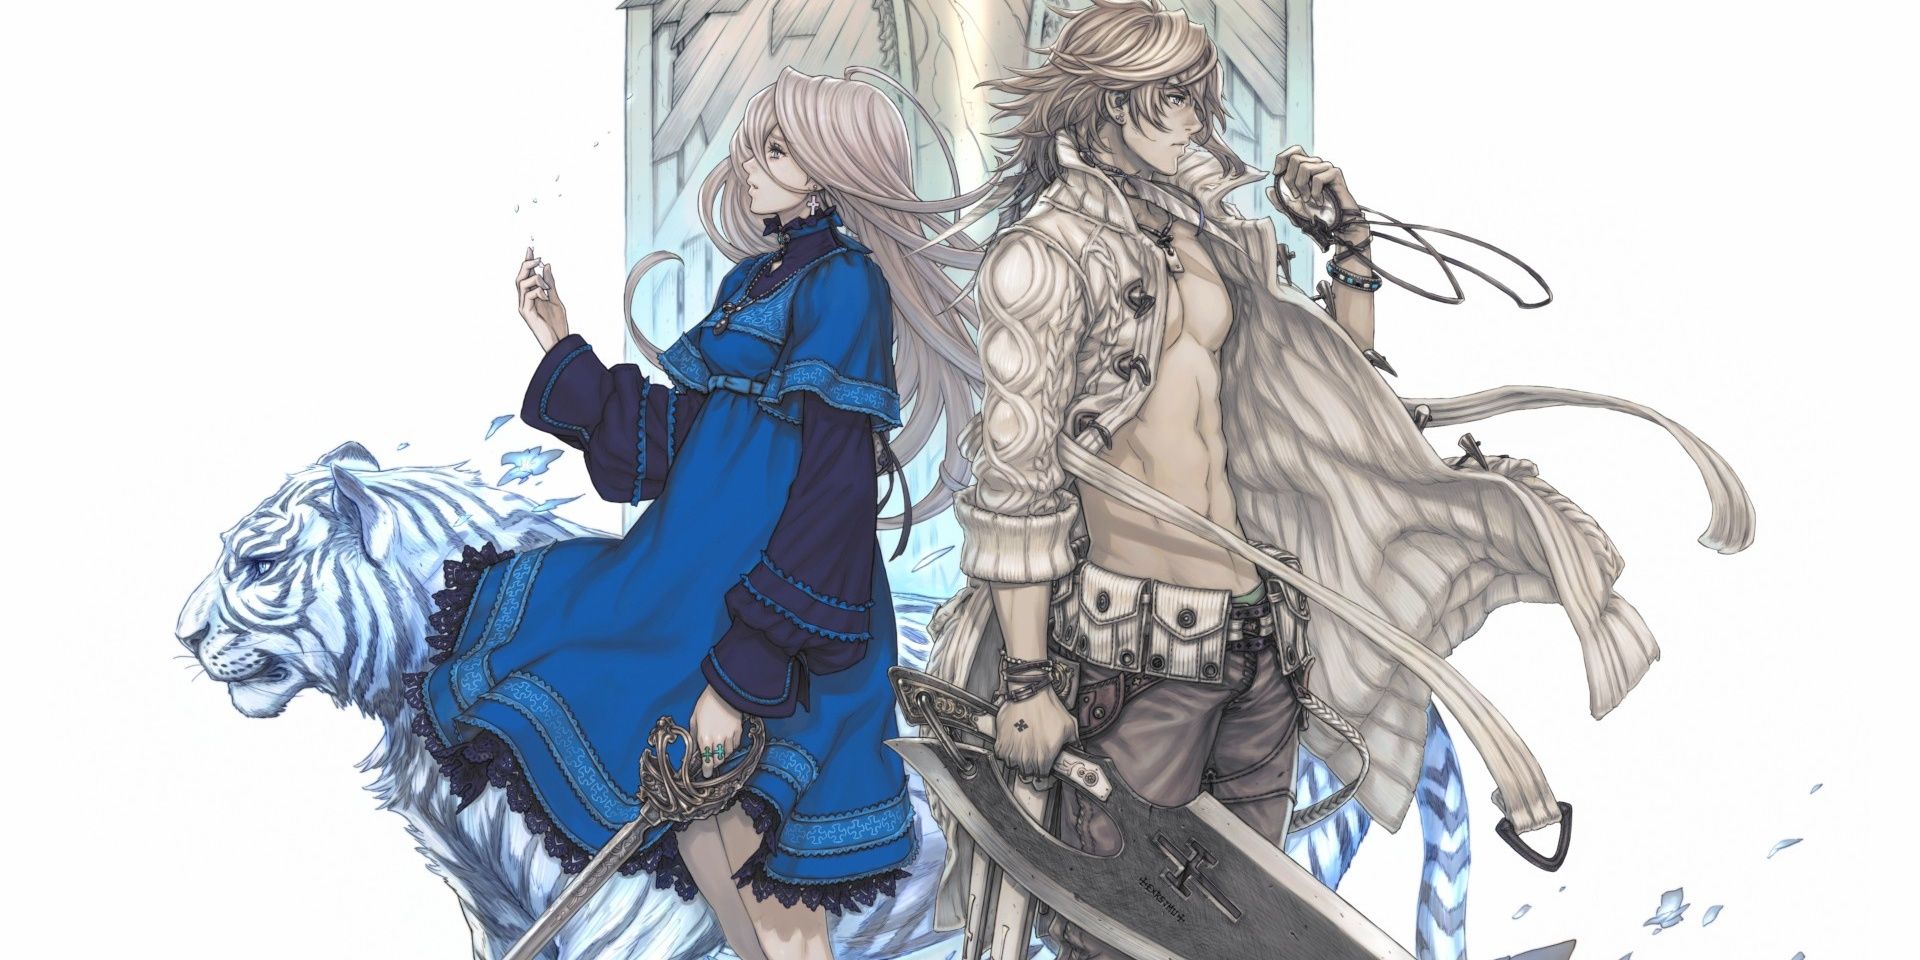 The Last Story Cover Art of Calista and Zael